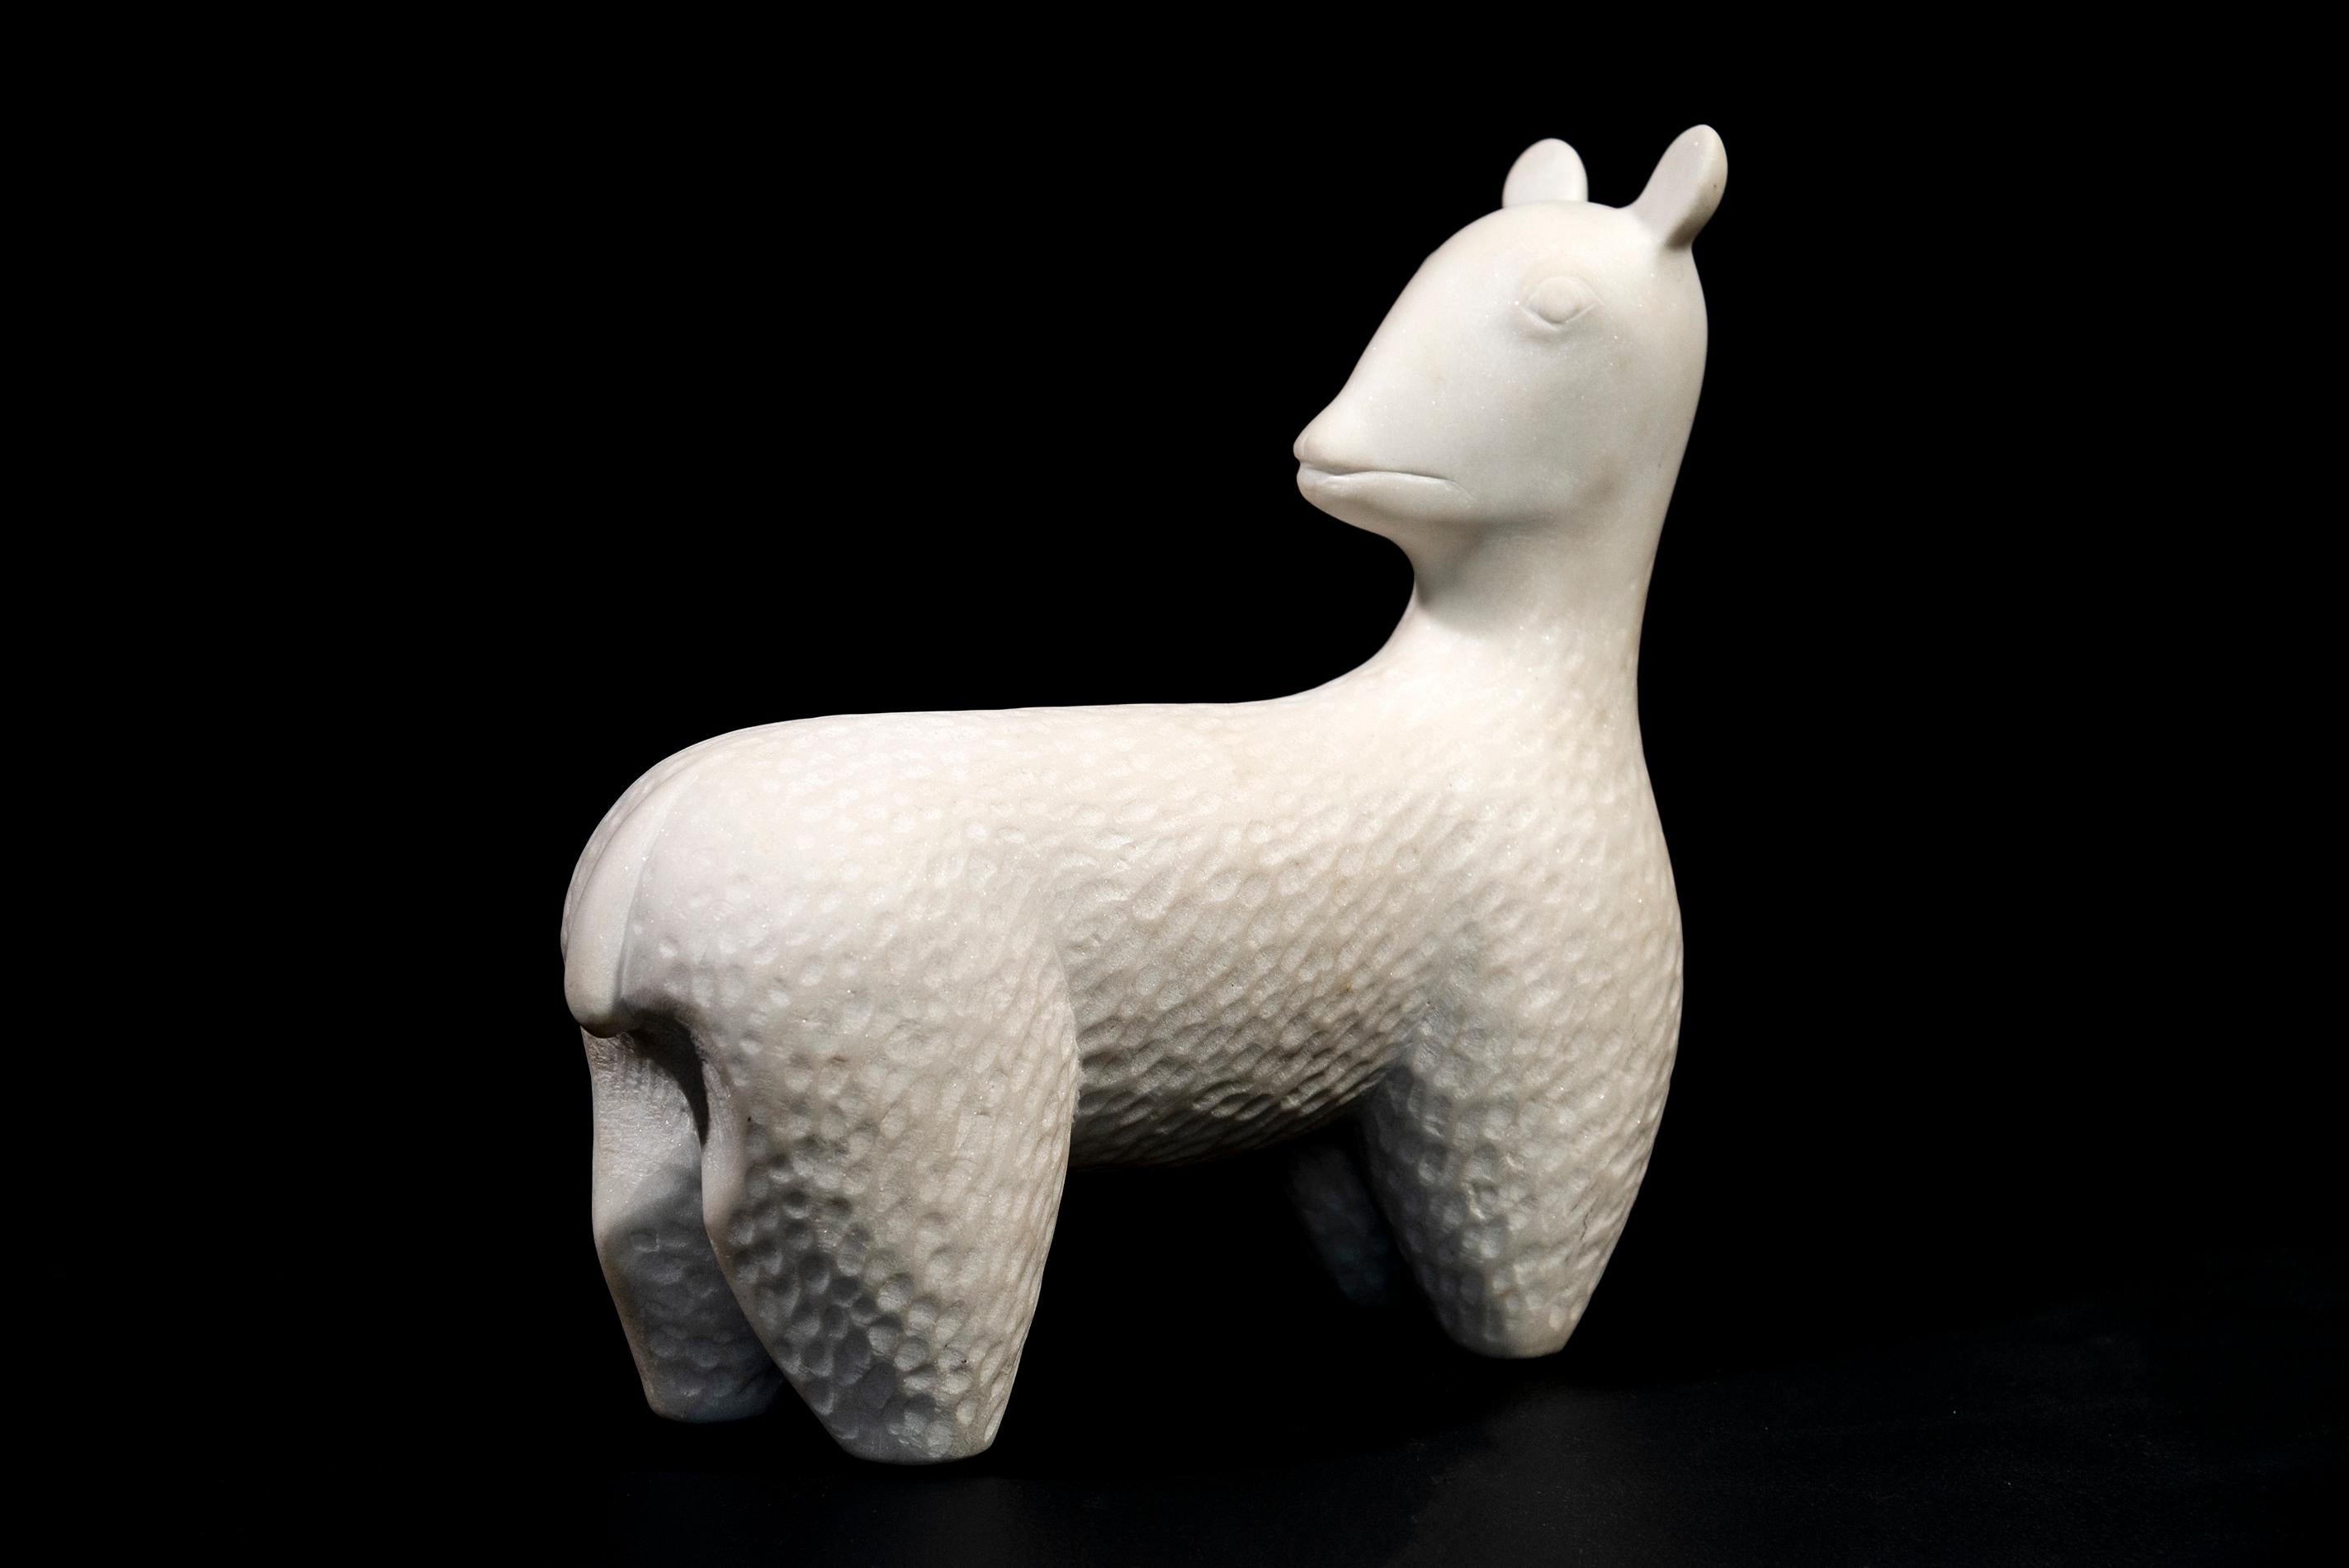 Sculpted from white Carrara marble, this charming table top sculpture of a goat is by Doug Robinson. In Italian ‘Capra’ means a female or nanny goat—a common sight in the countryside where Robinson has lived since the 1970’s. As a young man, the